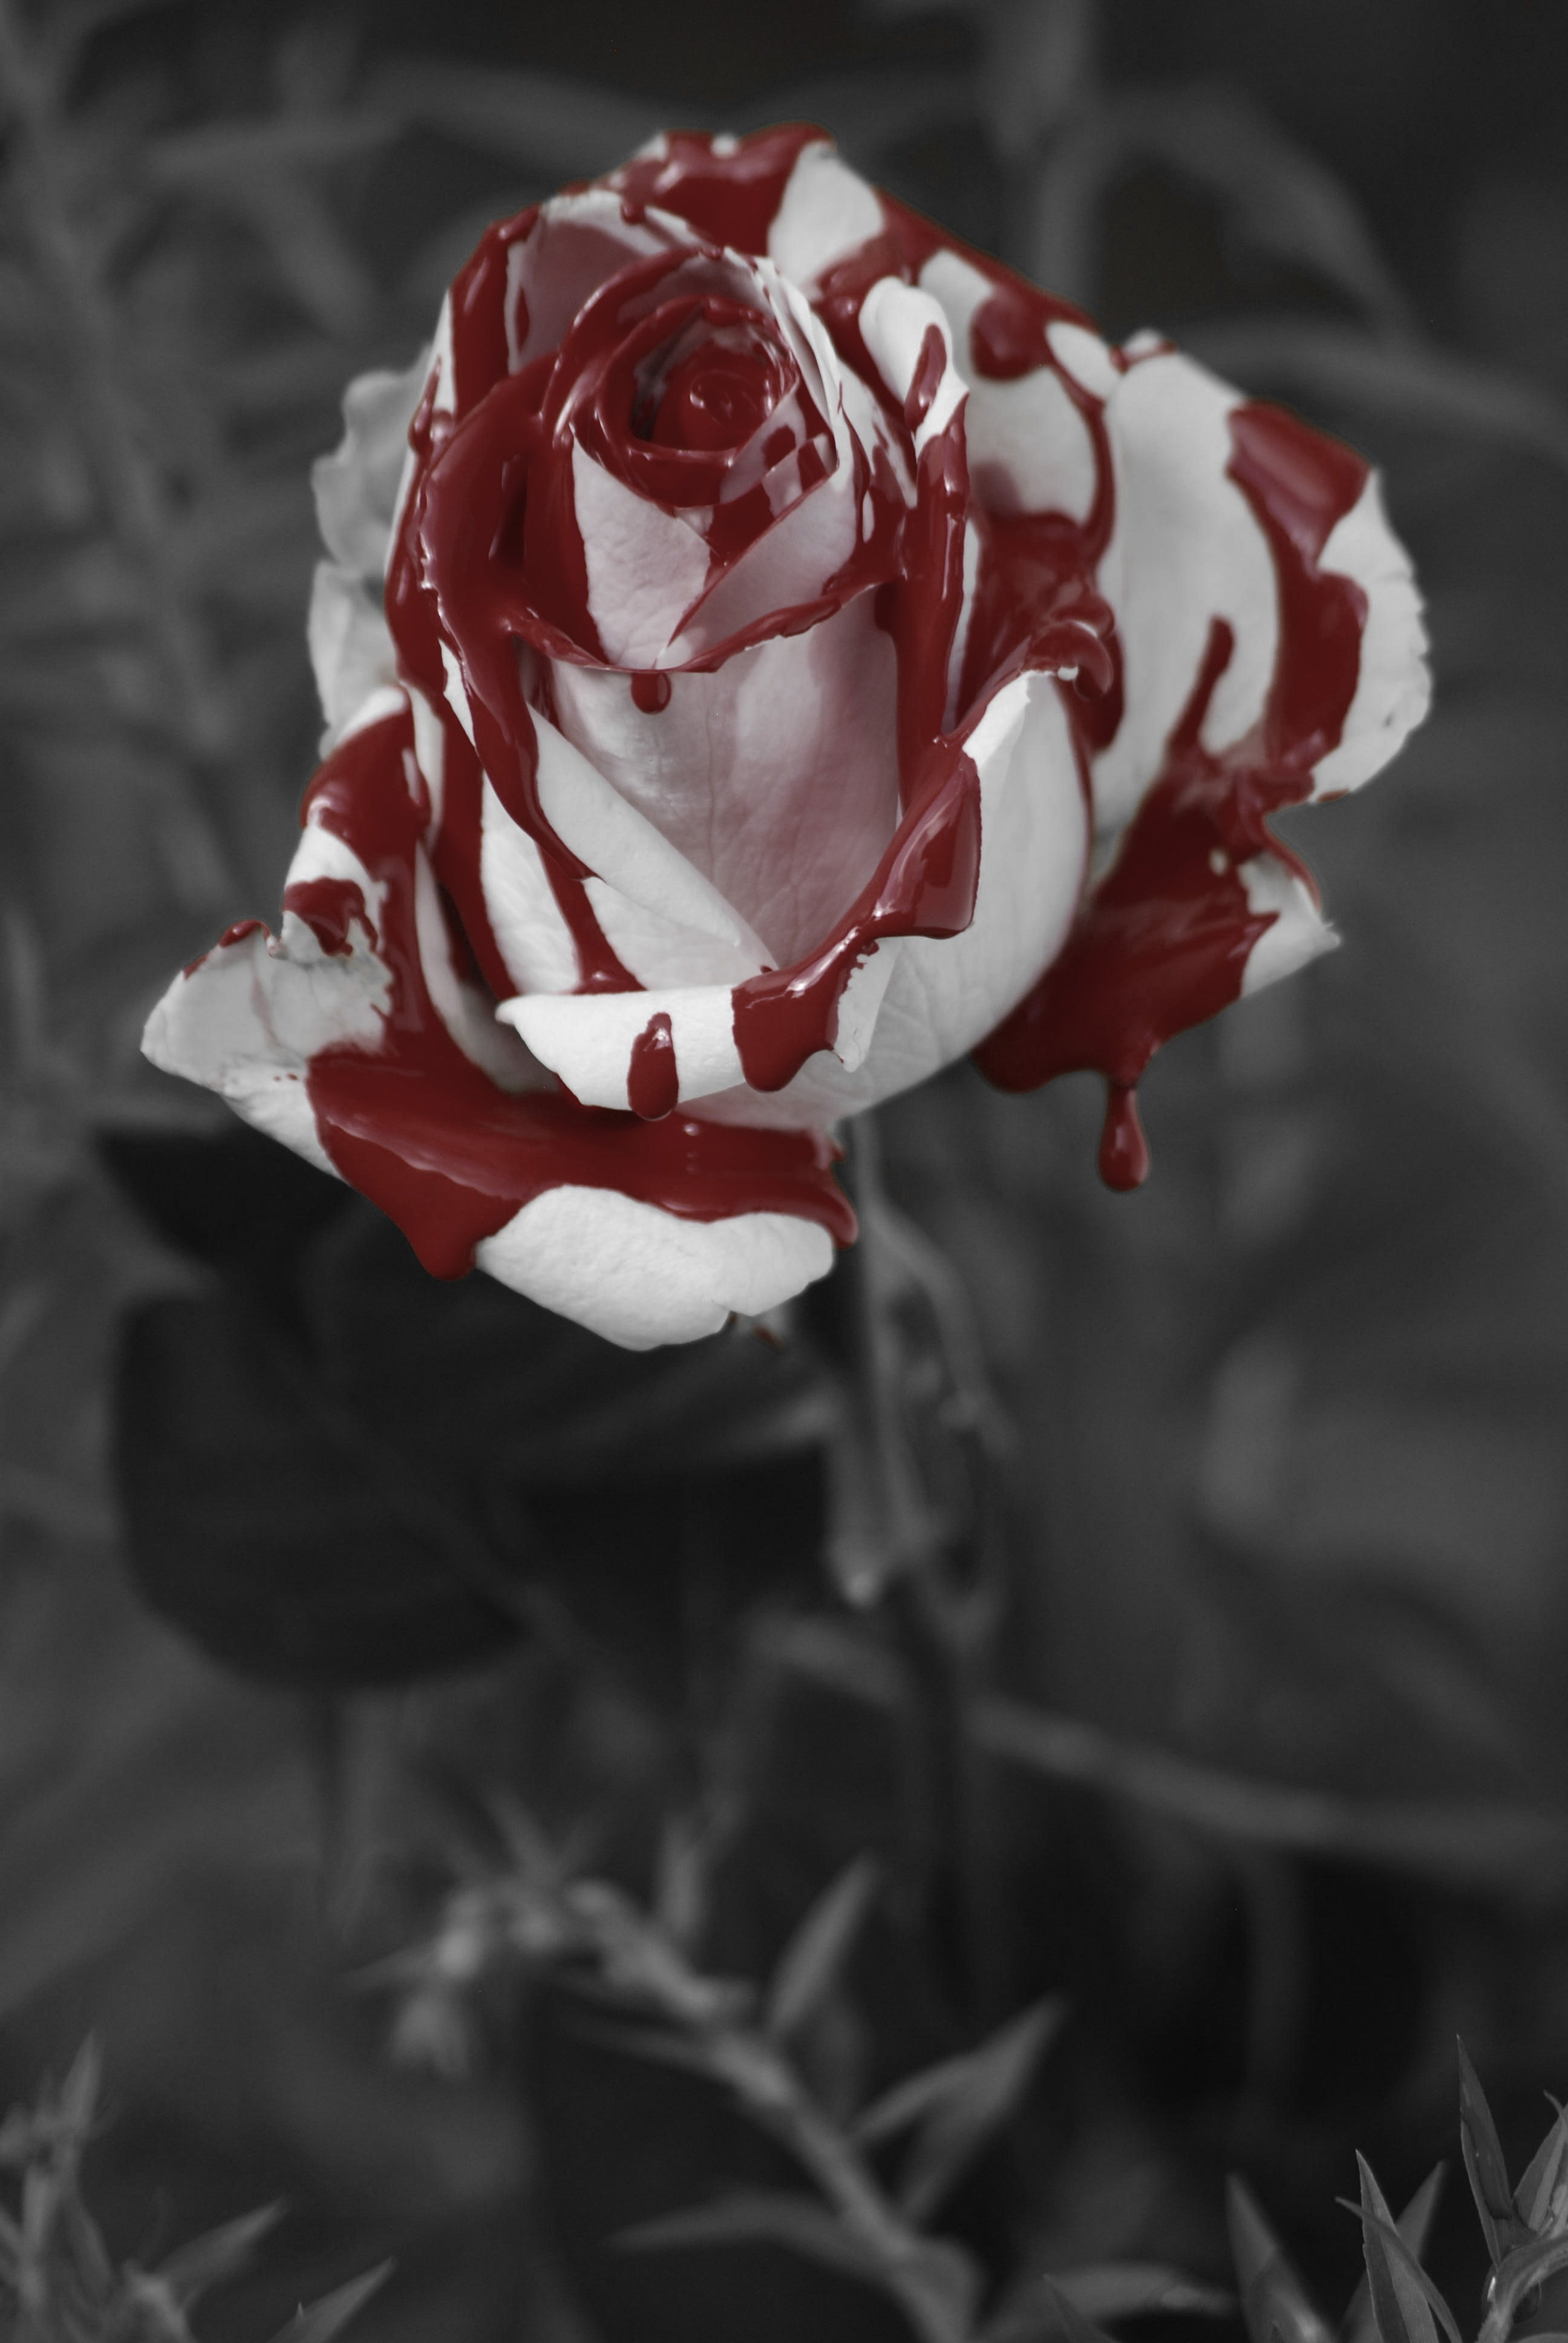 The Painted Rose - White Rose Painted Red - 2592x3872 Wallpaper 